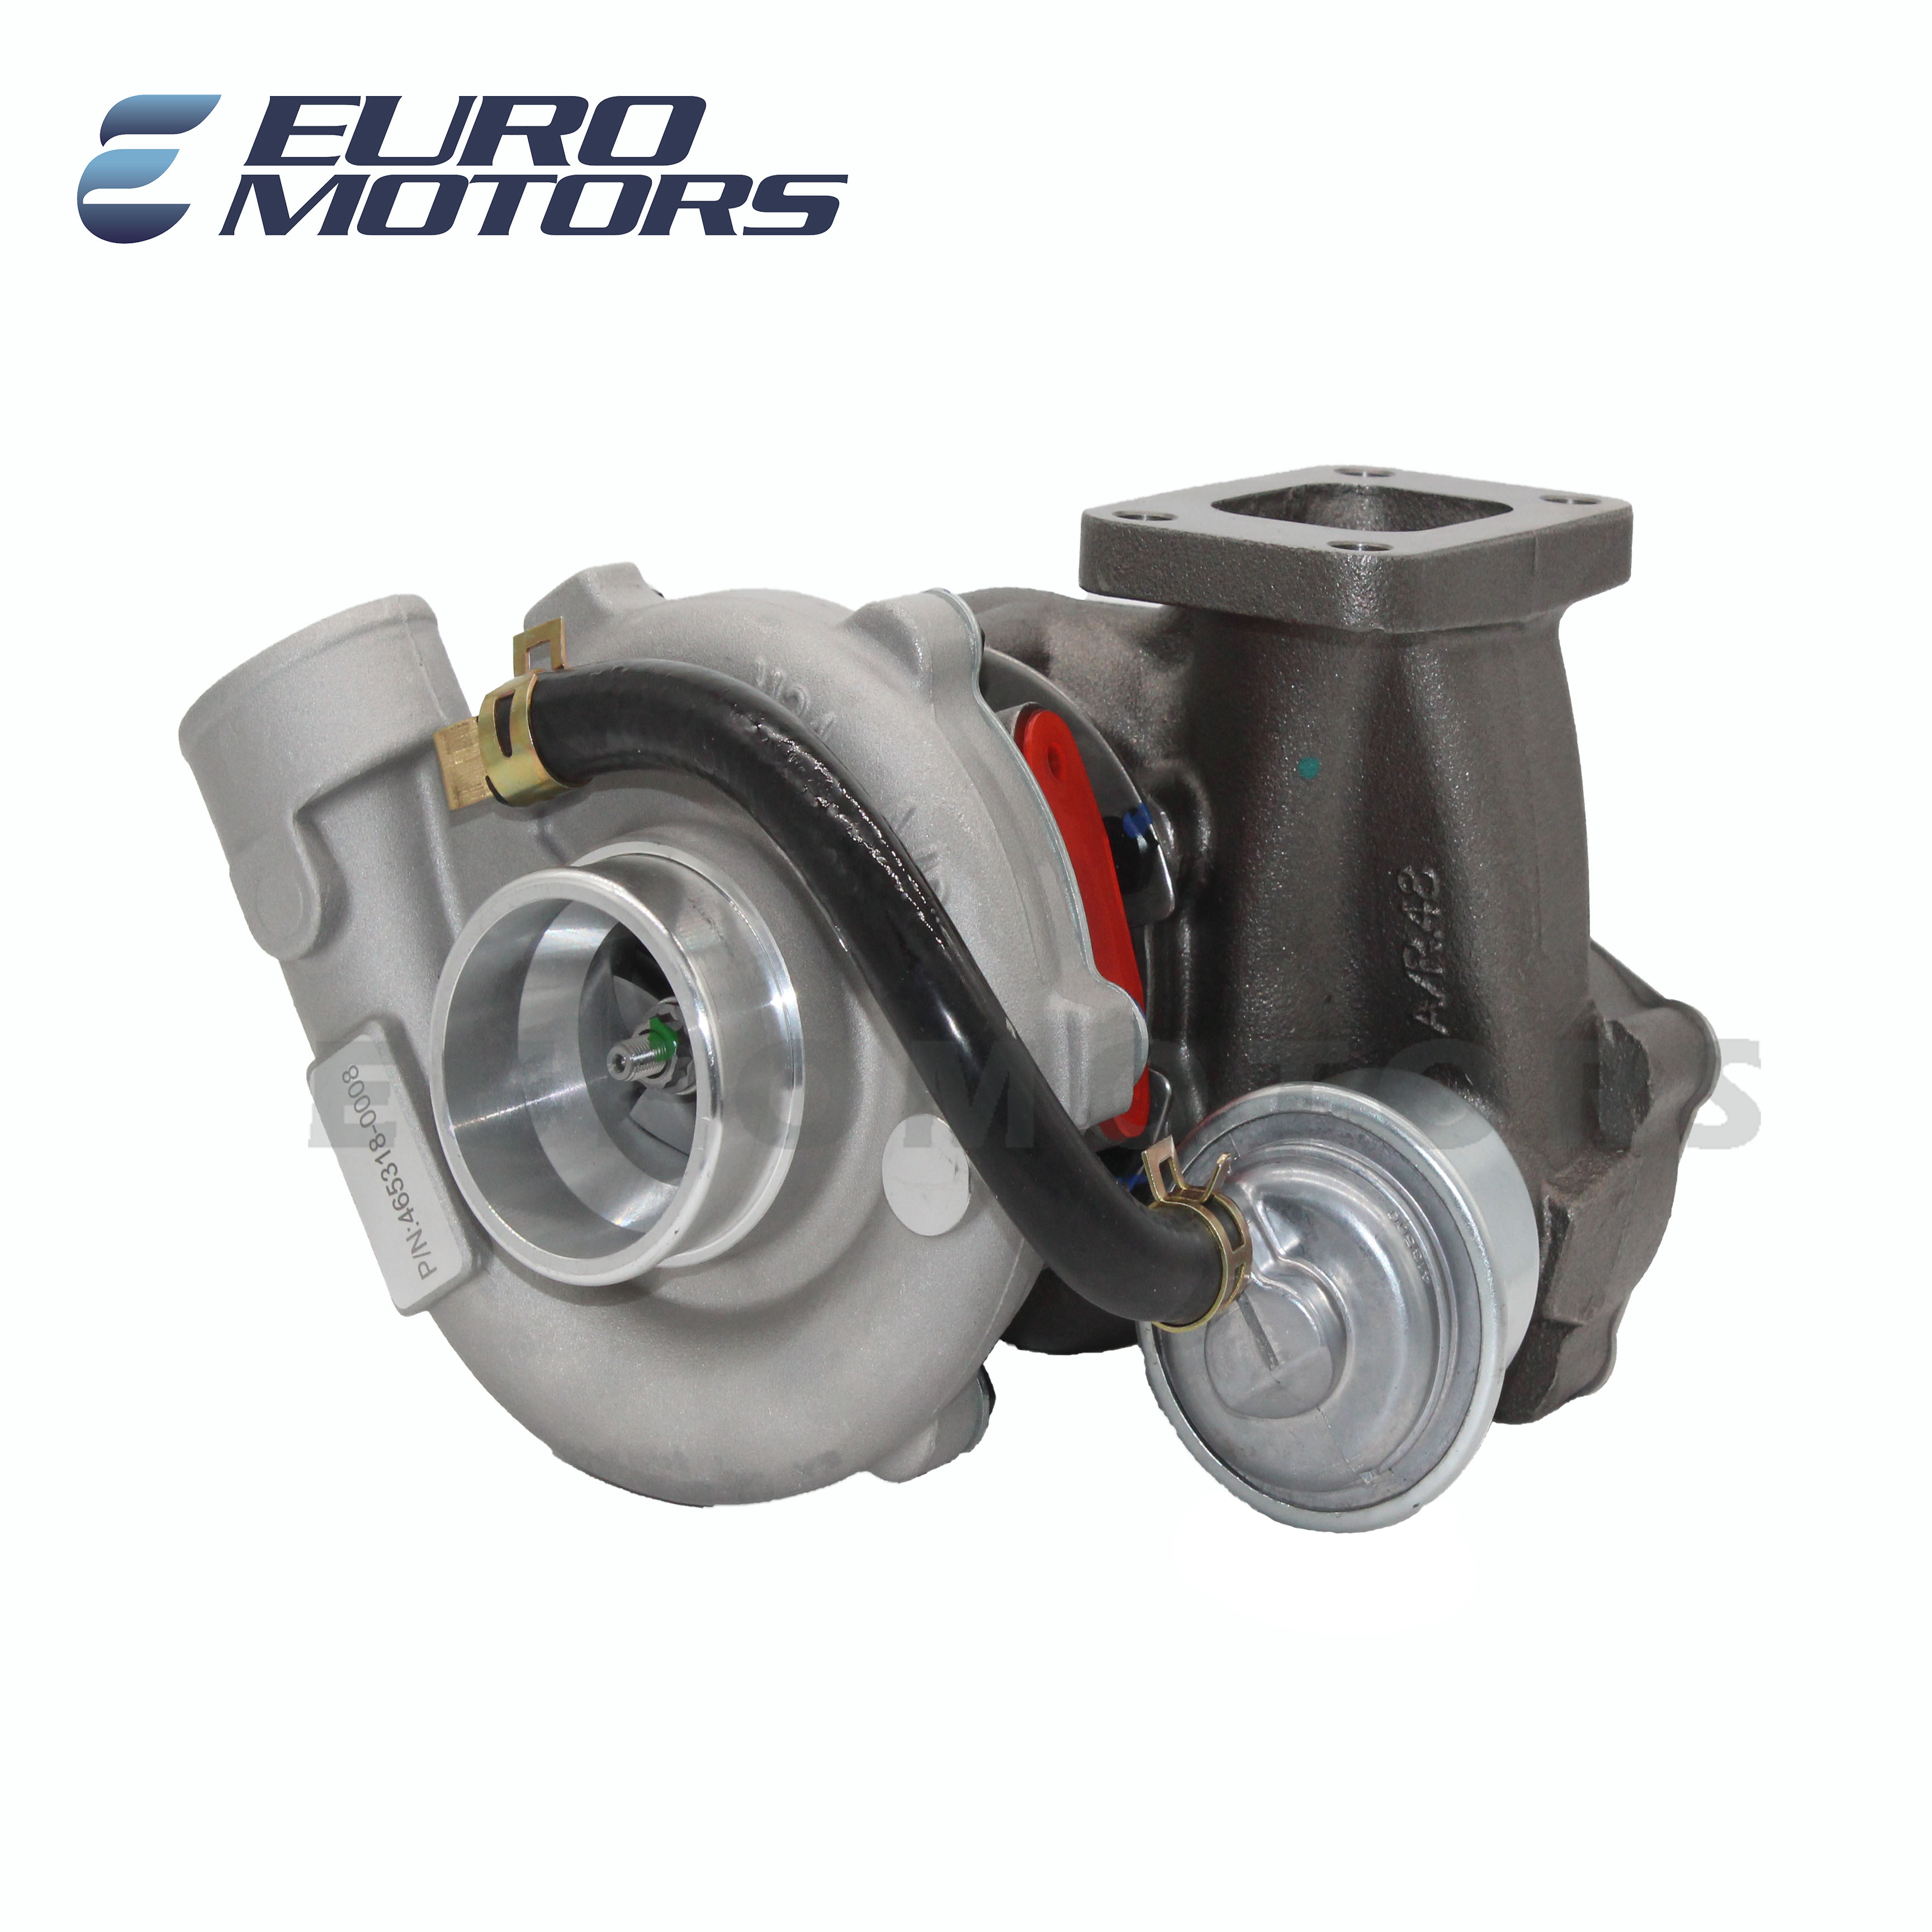 Truck Turbocharger Suppliers